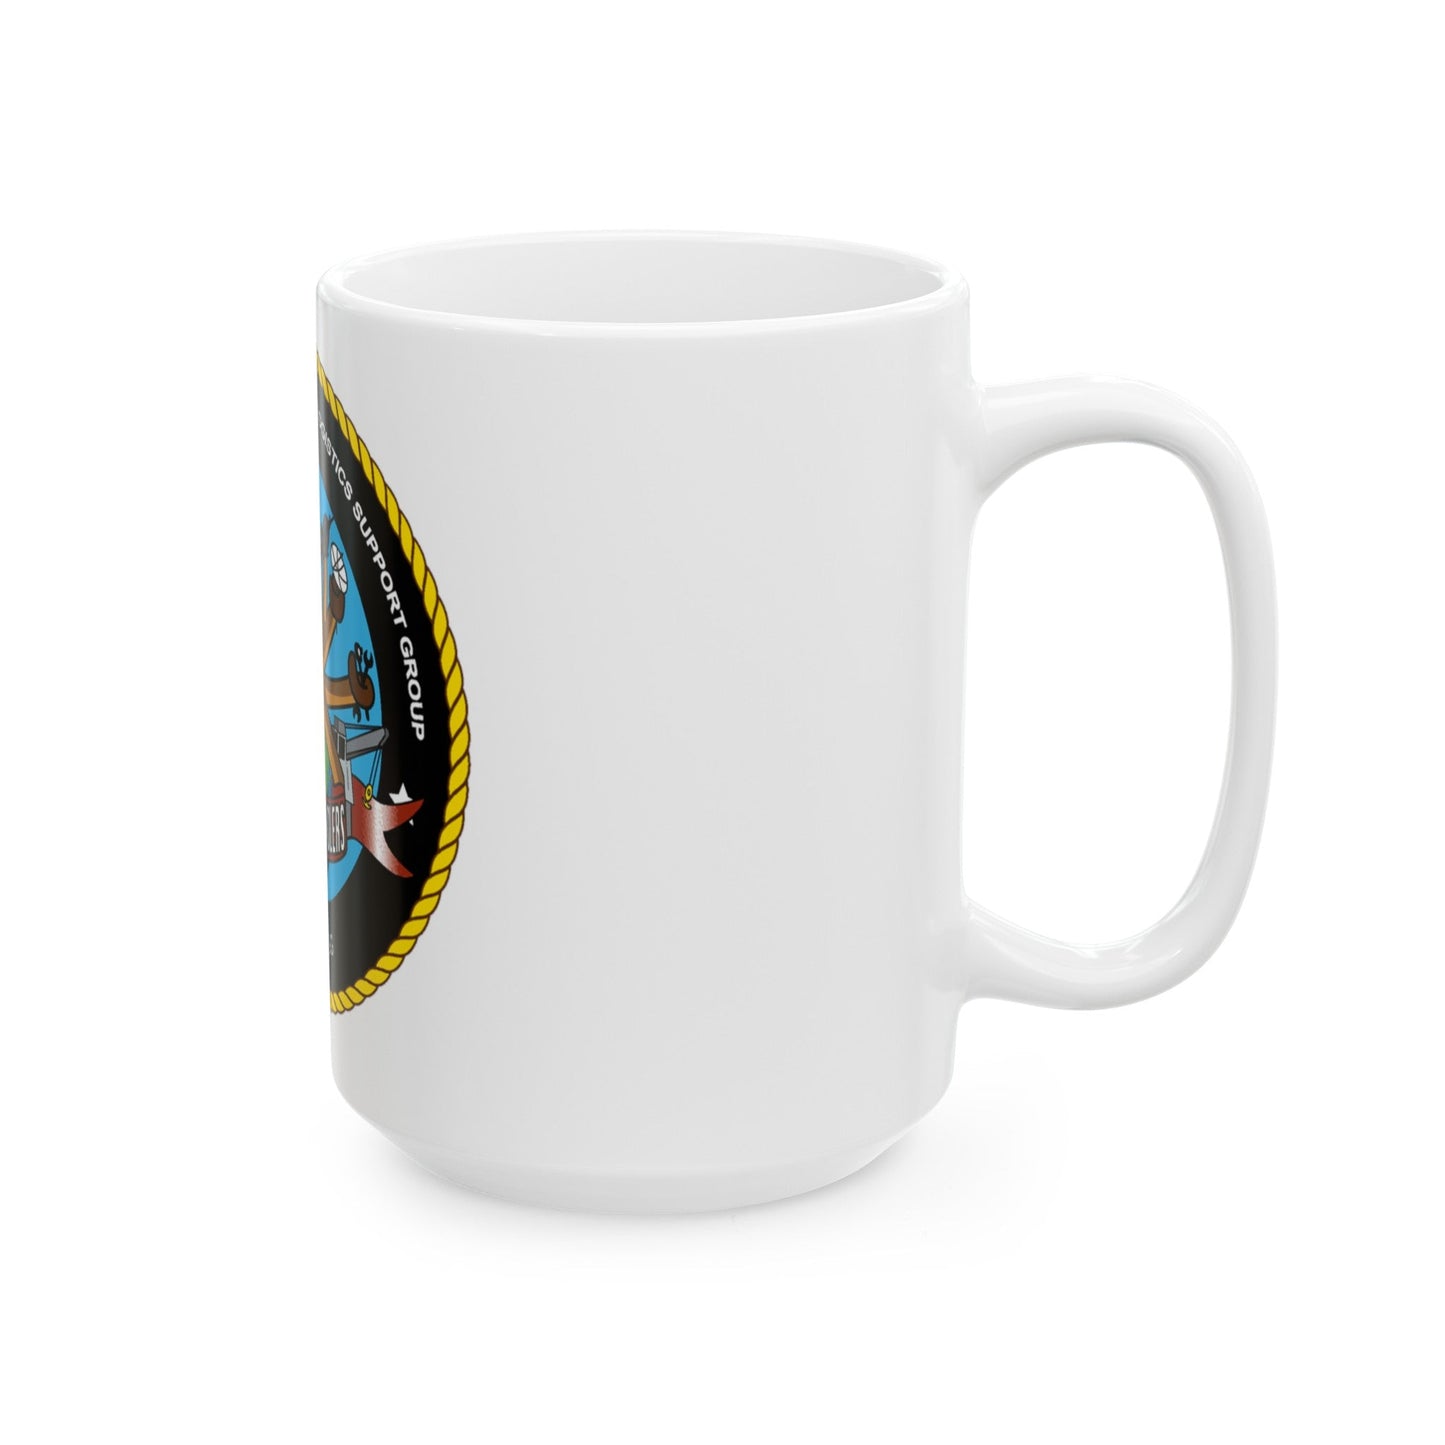 COMNAVELSG Cargo Handlers Commander Navy Expeditionary Logistics Support Group (U.S. Navy) White Coffee Mug-The Sticker Space